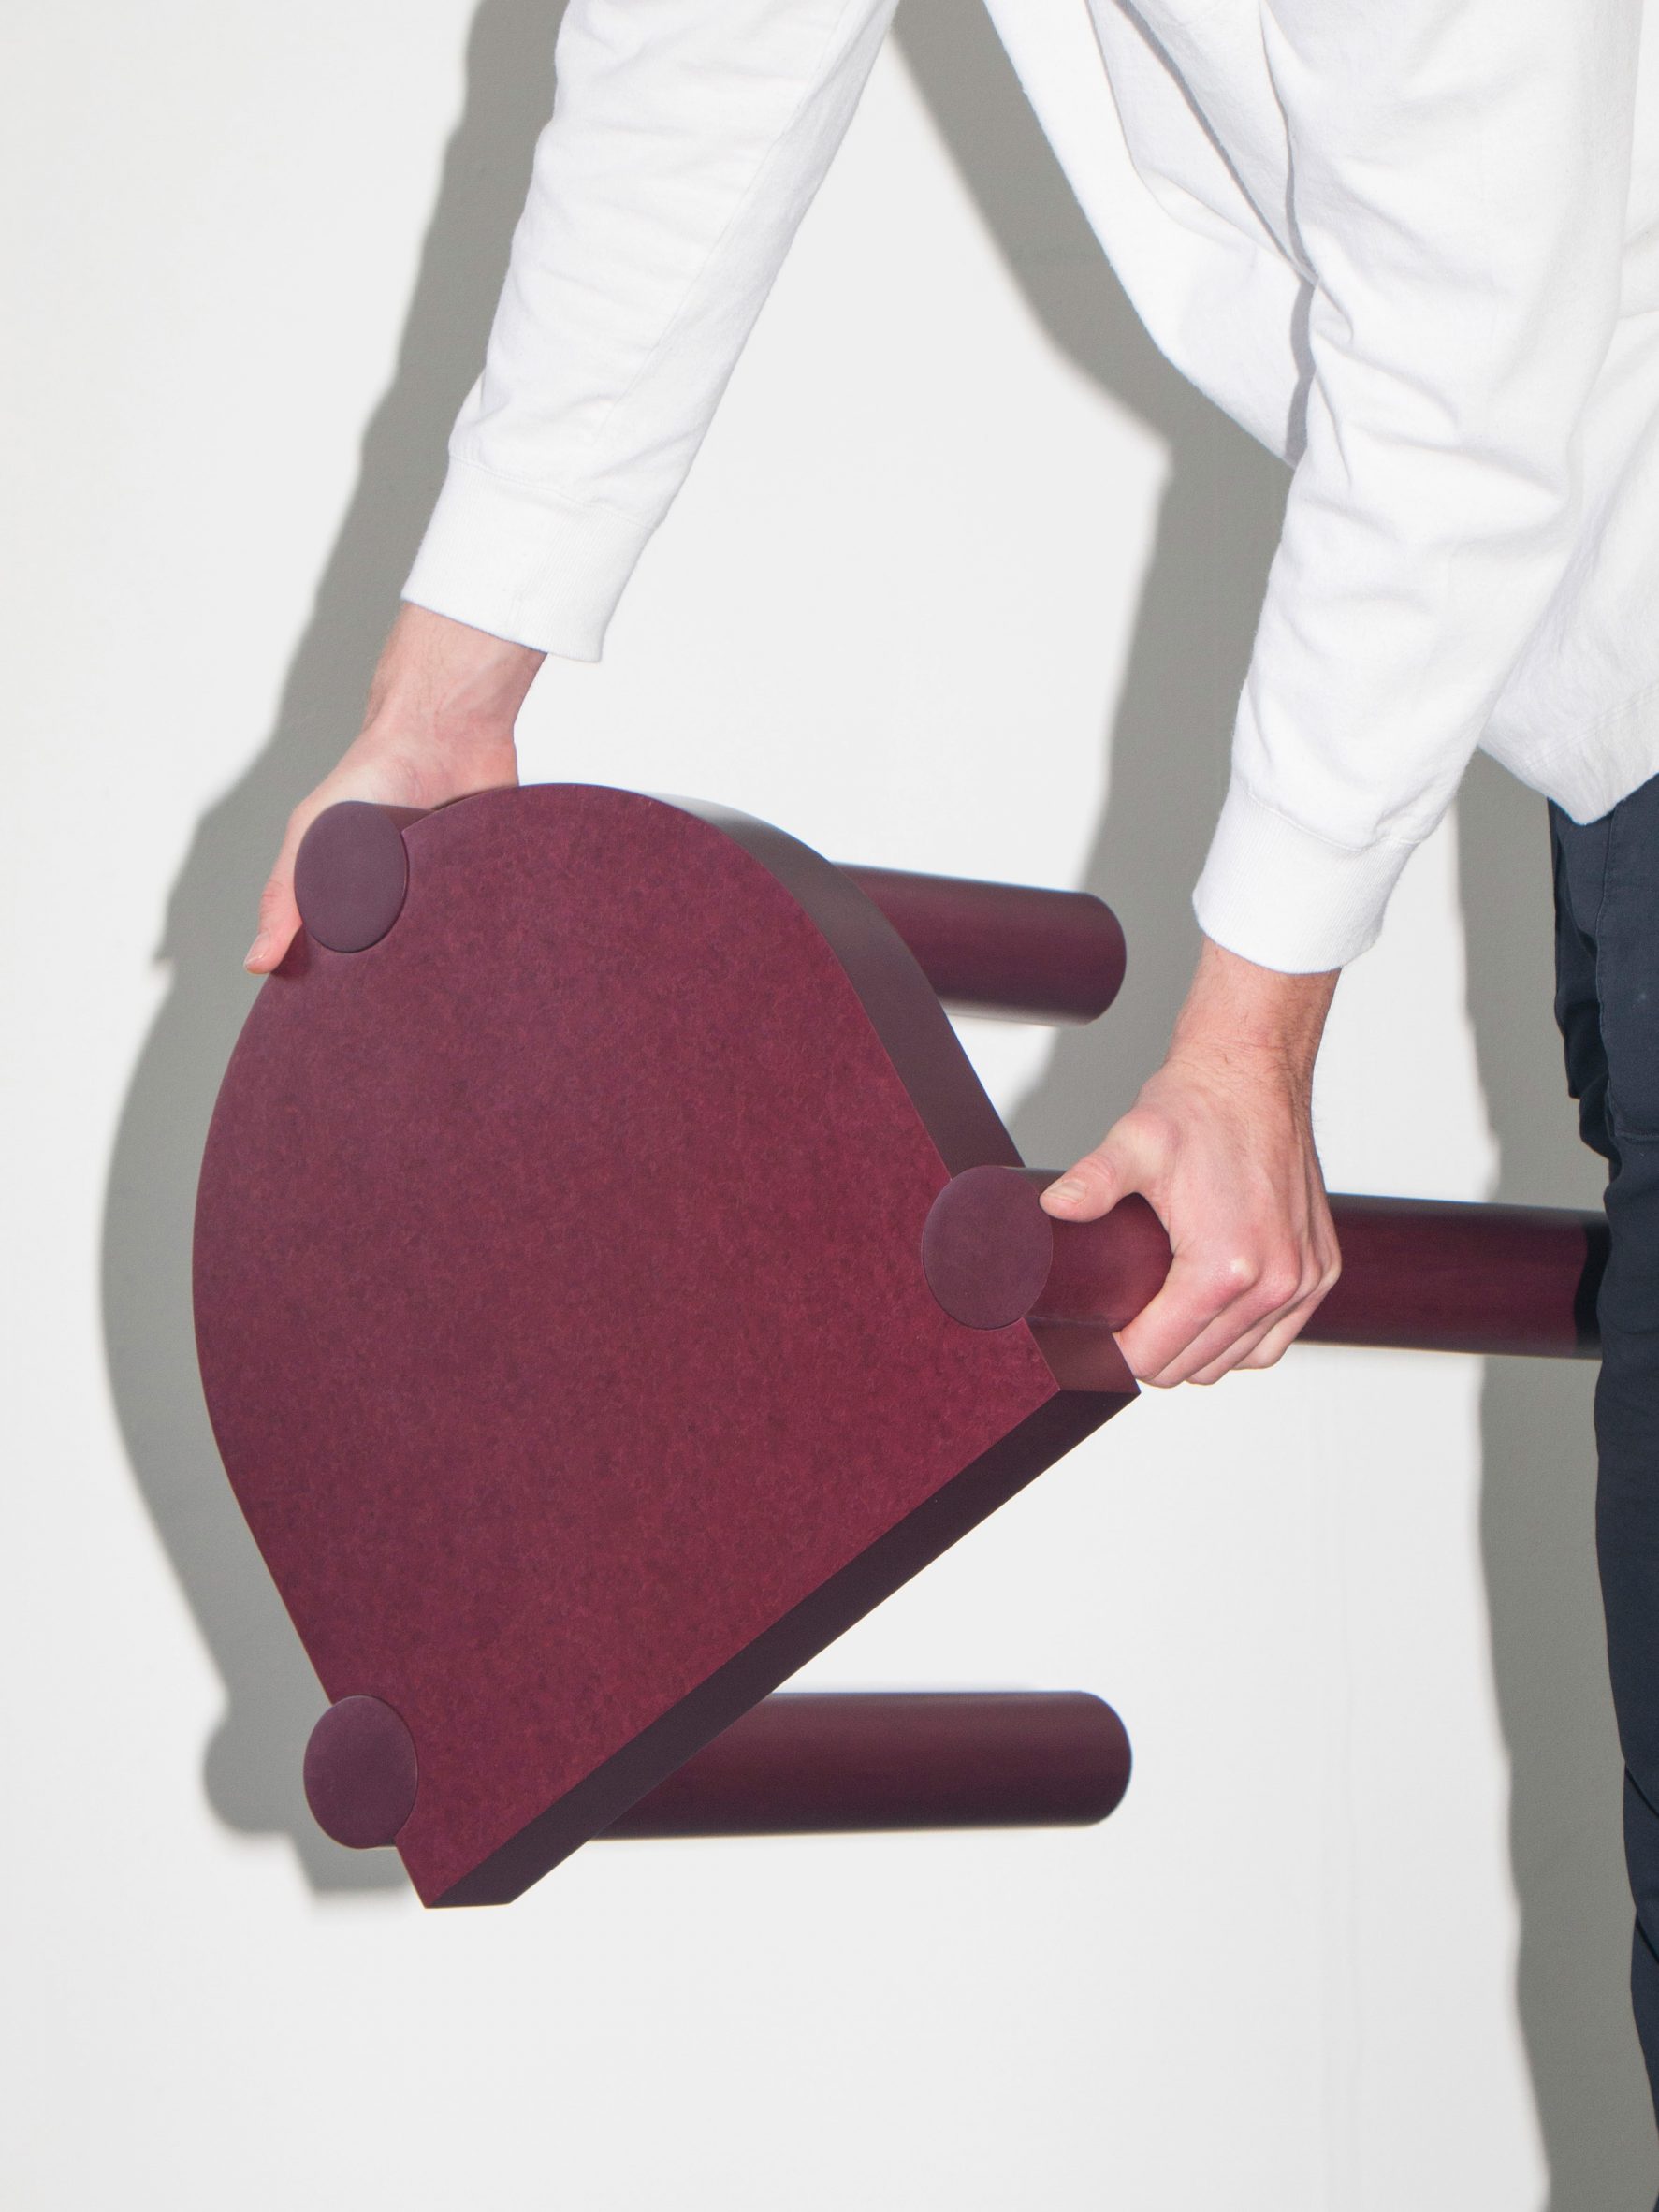 Man holding three-legged Plod stool made from recycled paper